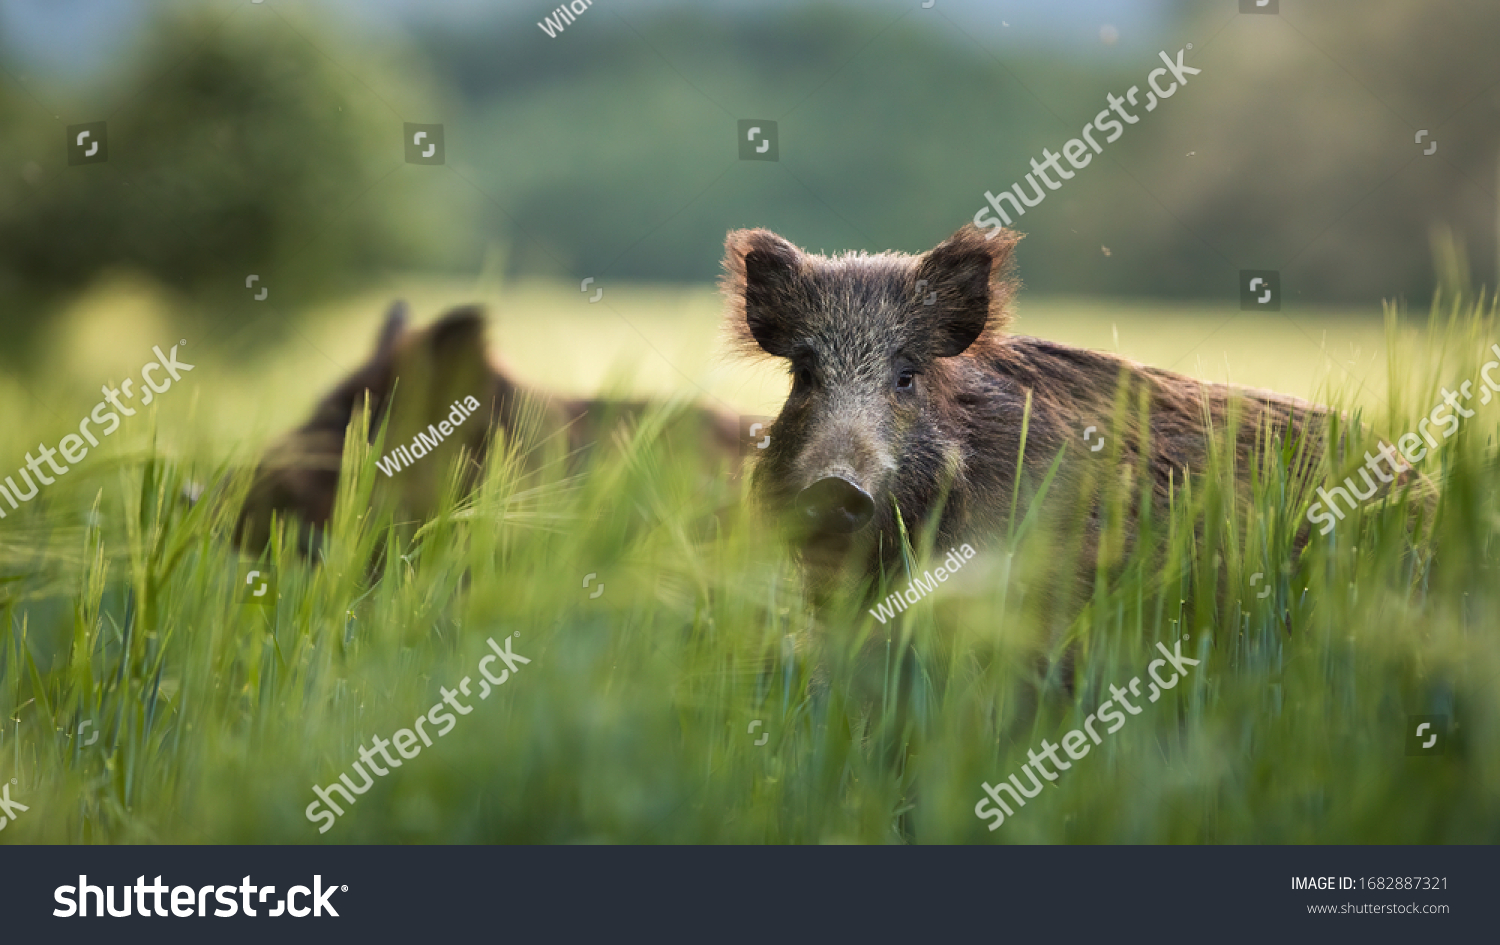 Wild boars feeding on green grain field in summer. Wild pig hiding in agricultural country copy space. Vertebrate grazing in summertime with blurred background.